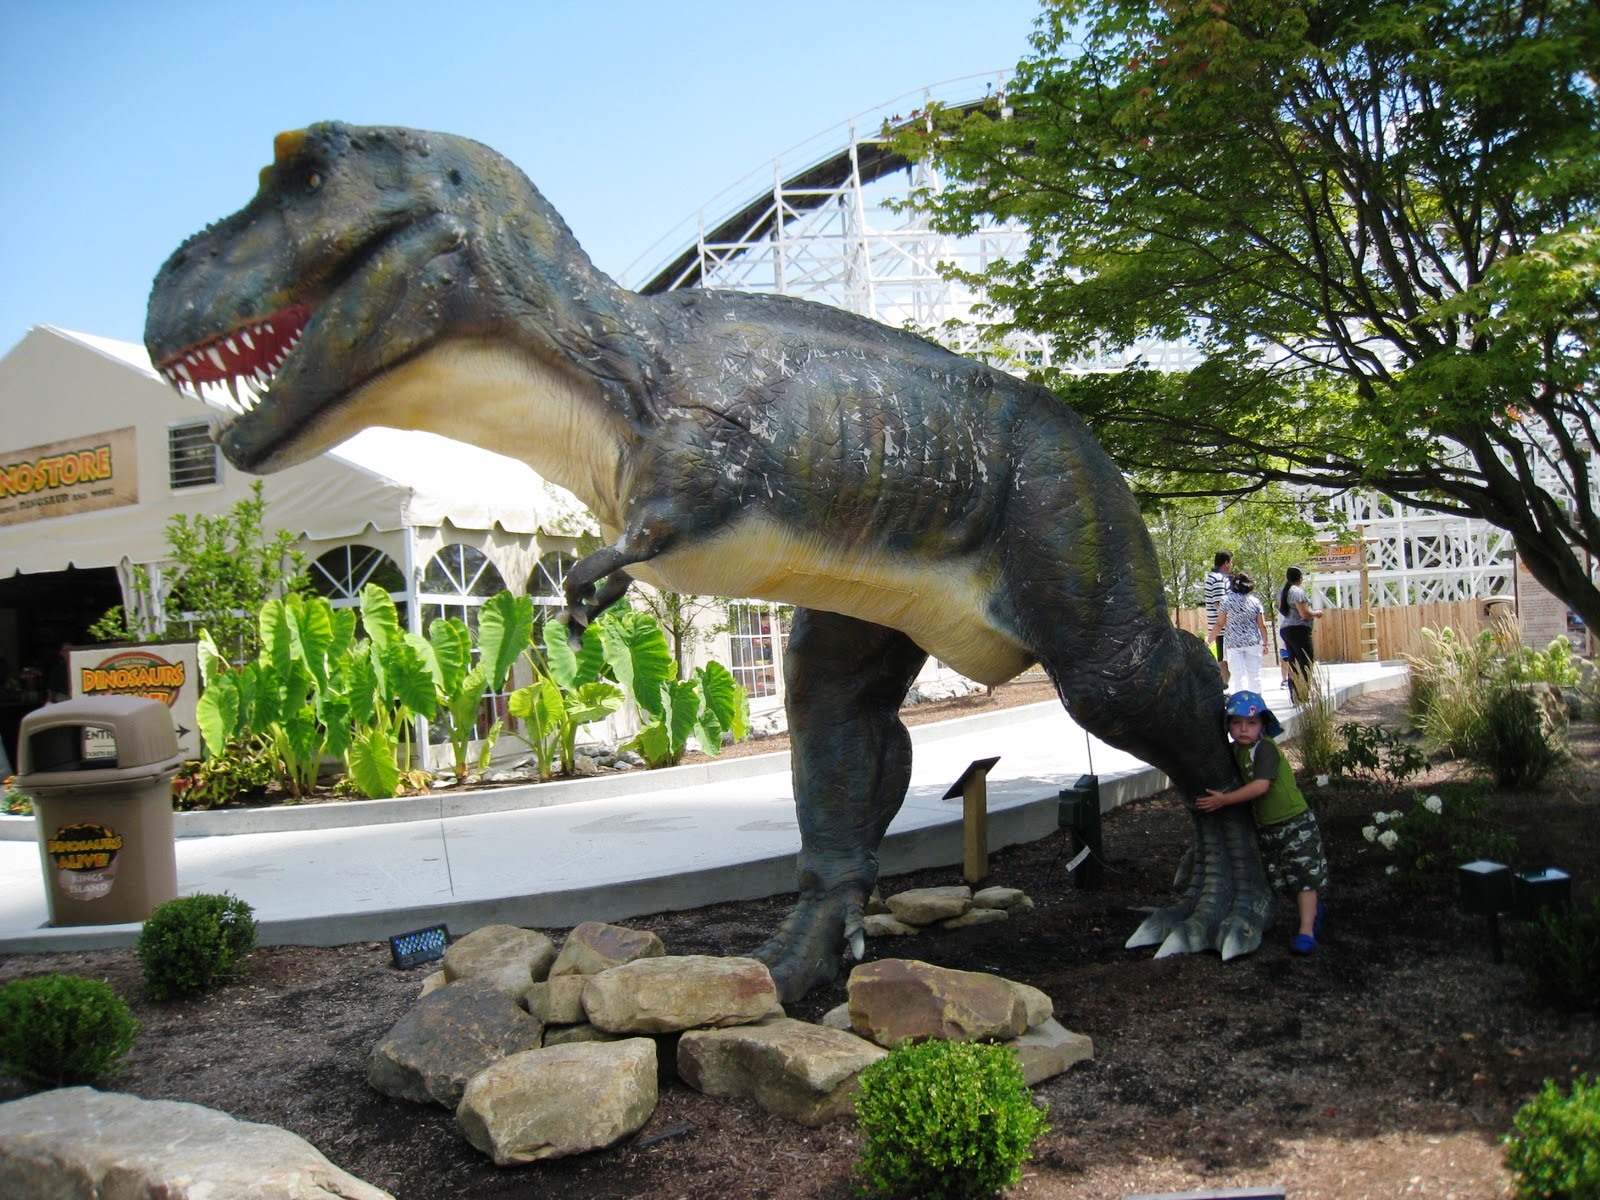 Top Three Cool Dinosaur Theme Parks of the World | World for Travel